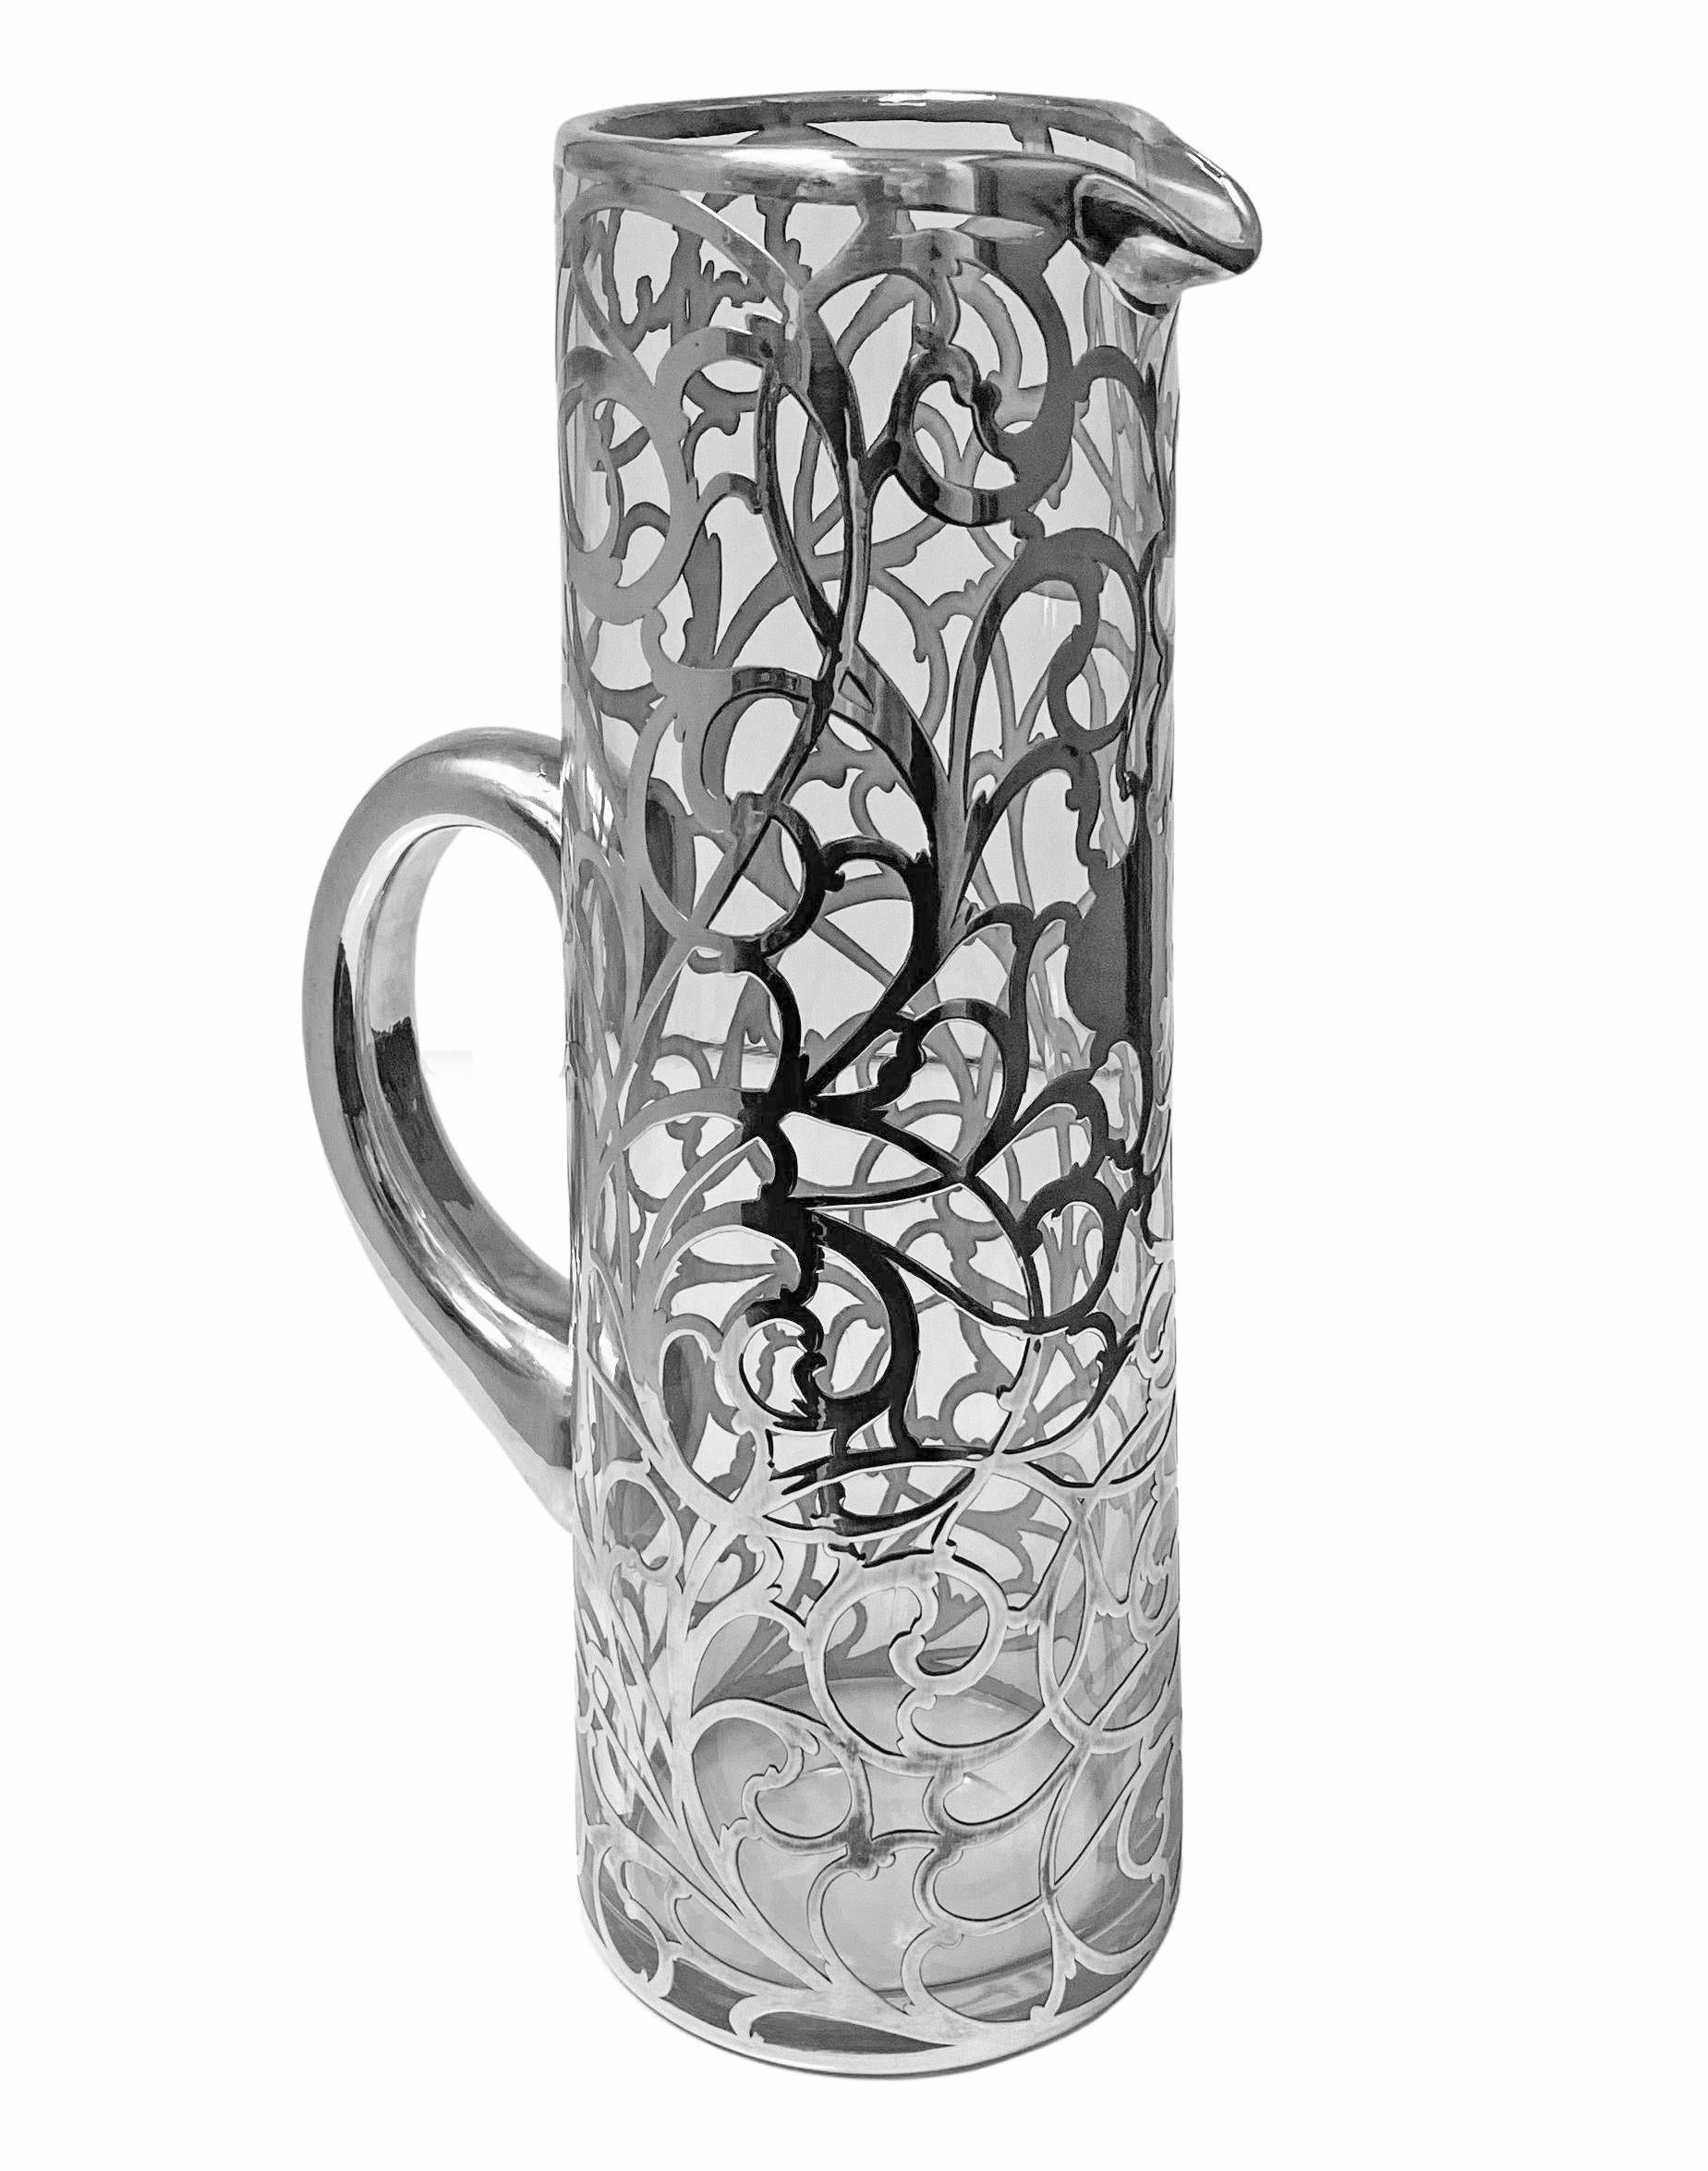 Alvin sterling overlay clear glass jug pitcher, c. 1900. Large size tapered cylindrical, with thick applied sterling silver overlay, reticulated and engraved scrolling vine, central vacant cartouche. Rubbed Alvin Corp marks to base rim 999/1000 Fine